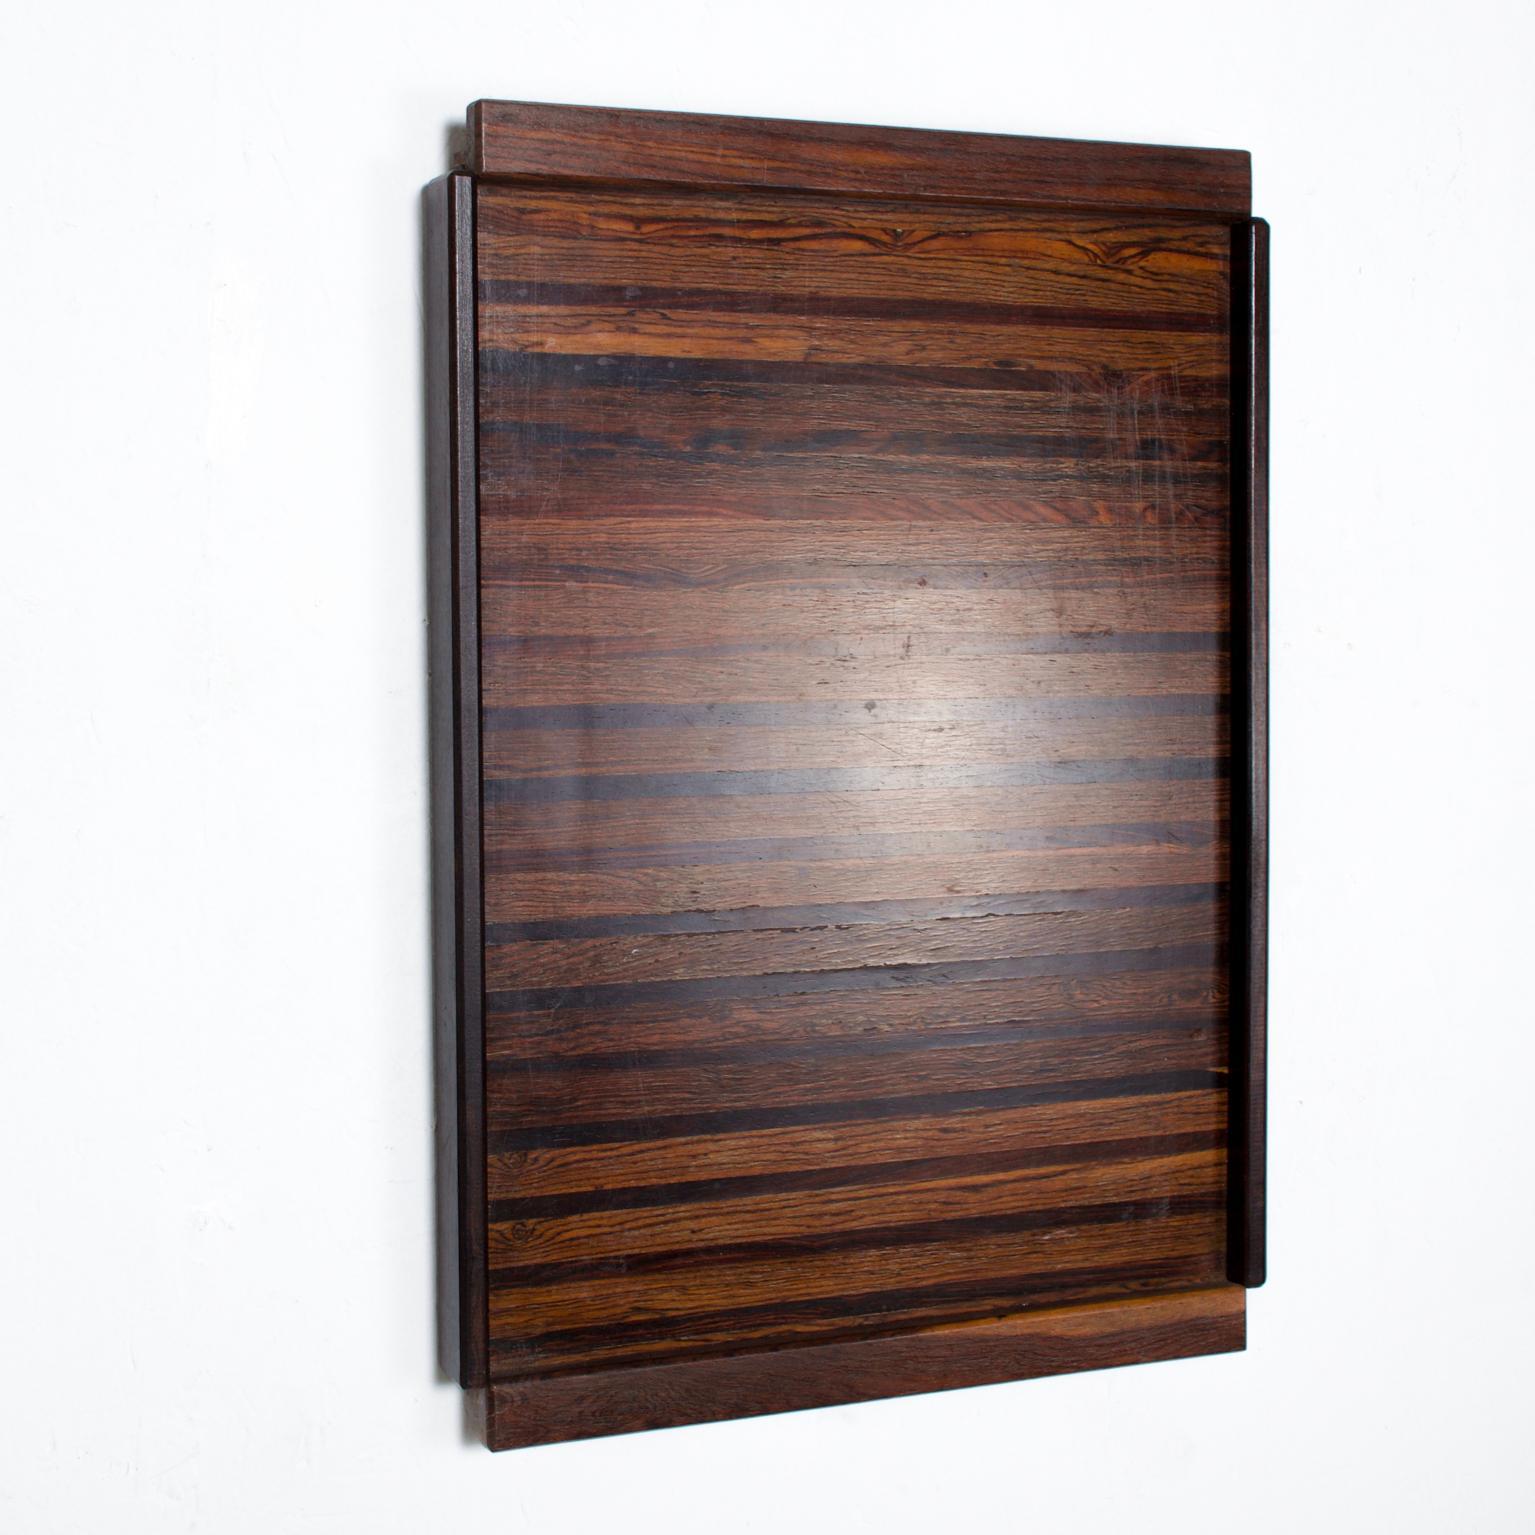 We are pleased to offer for your consideration a Large service tray by Don S Shoemaker. Beautiful straight geometric woodwork with exotic woods. A small hole on the back of the tray allows easy hanging onto the wall. Retains label from the maker on